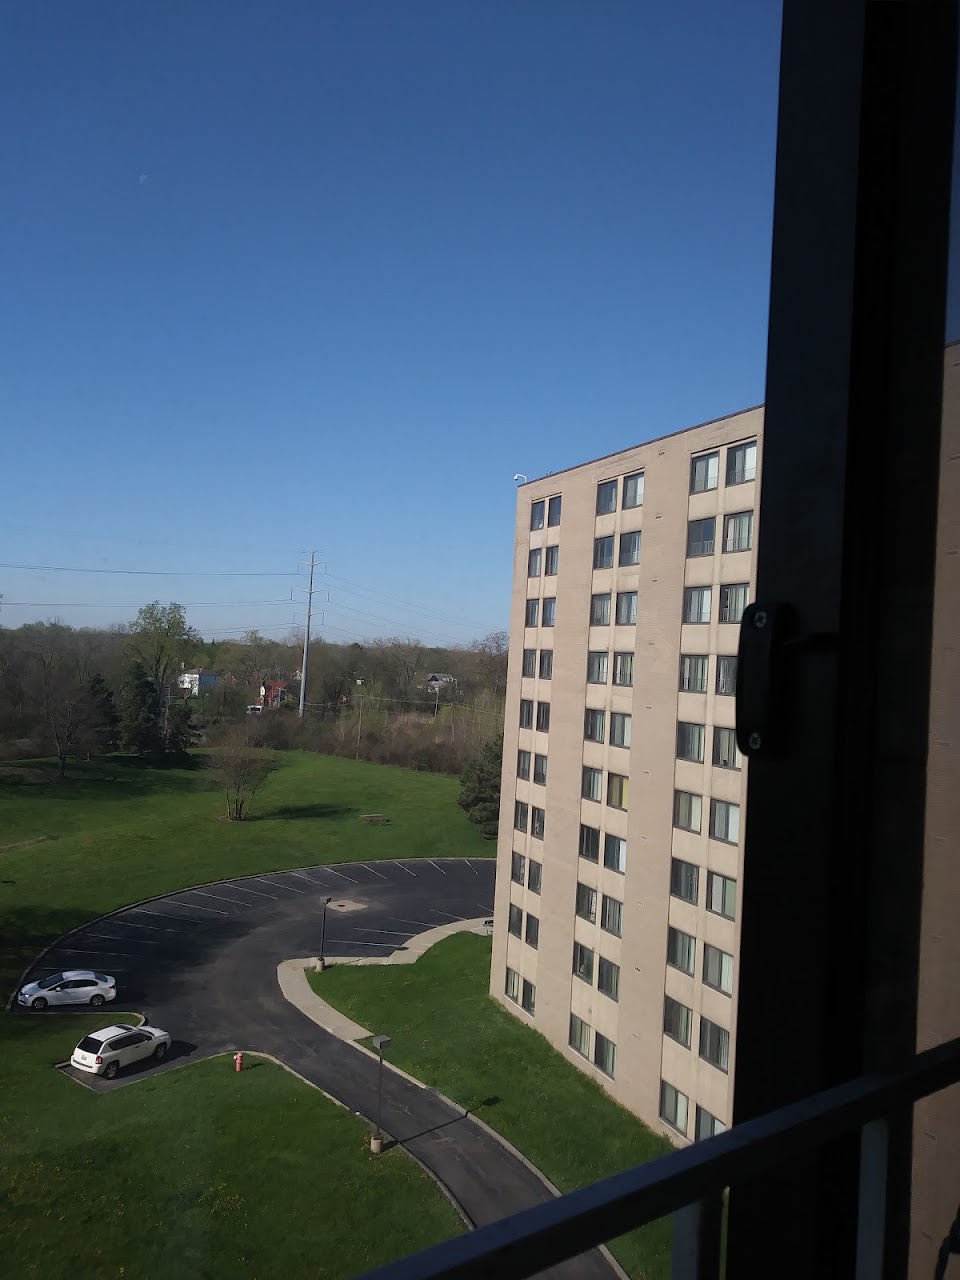 Photo of THOMPSON TOWER APTS. Affordable housing located at 27727 MICHIGAN AVE INKSTER, MI 48141